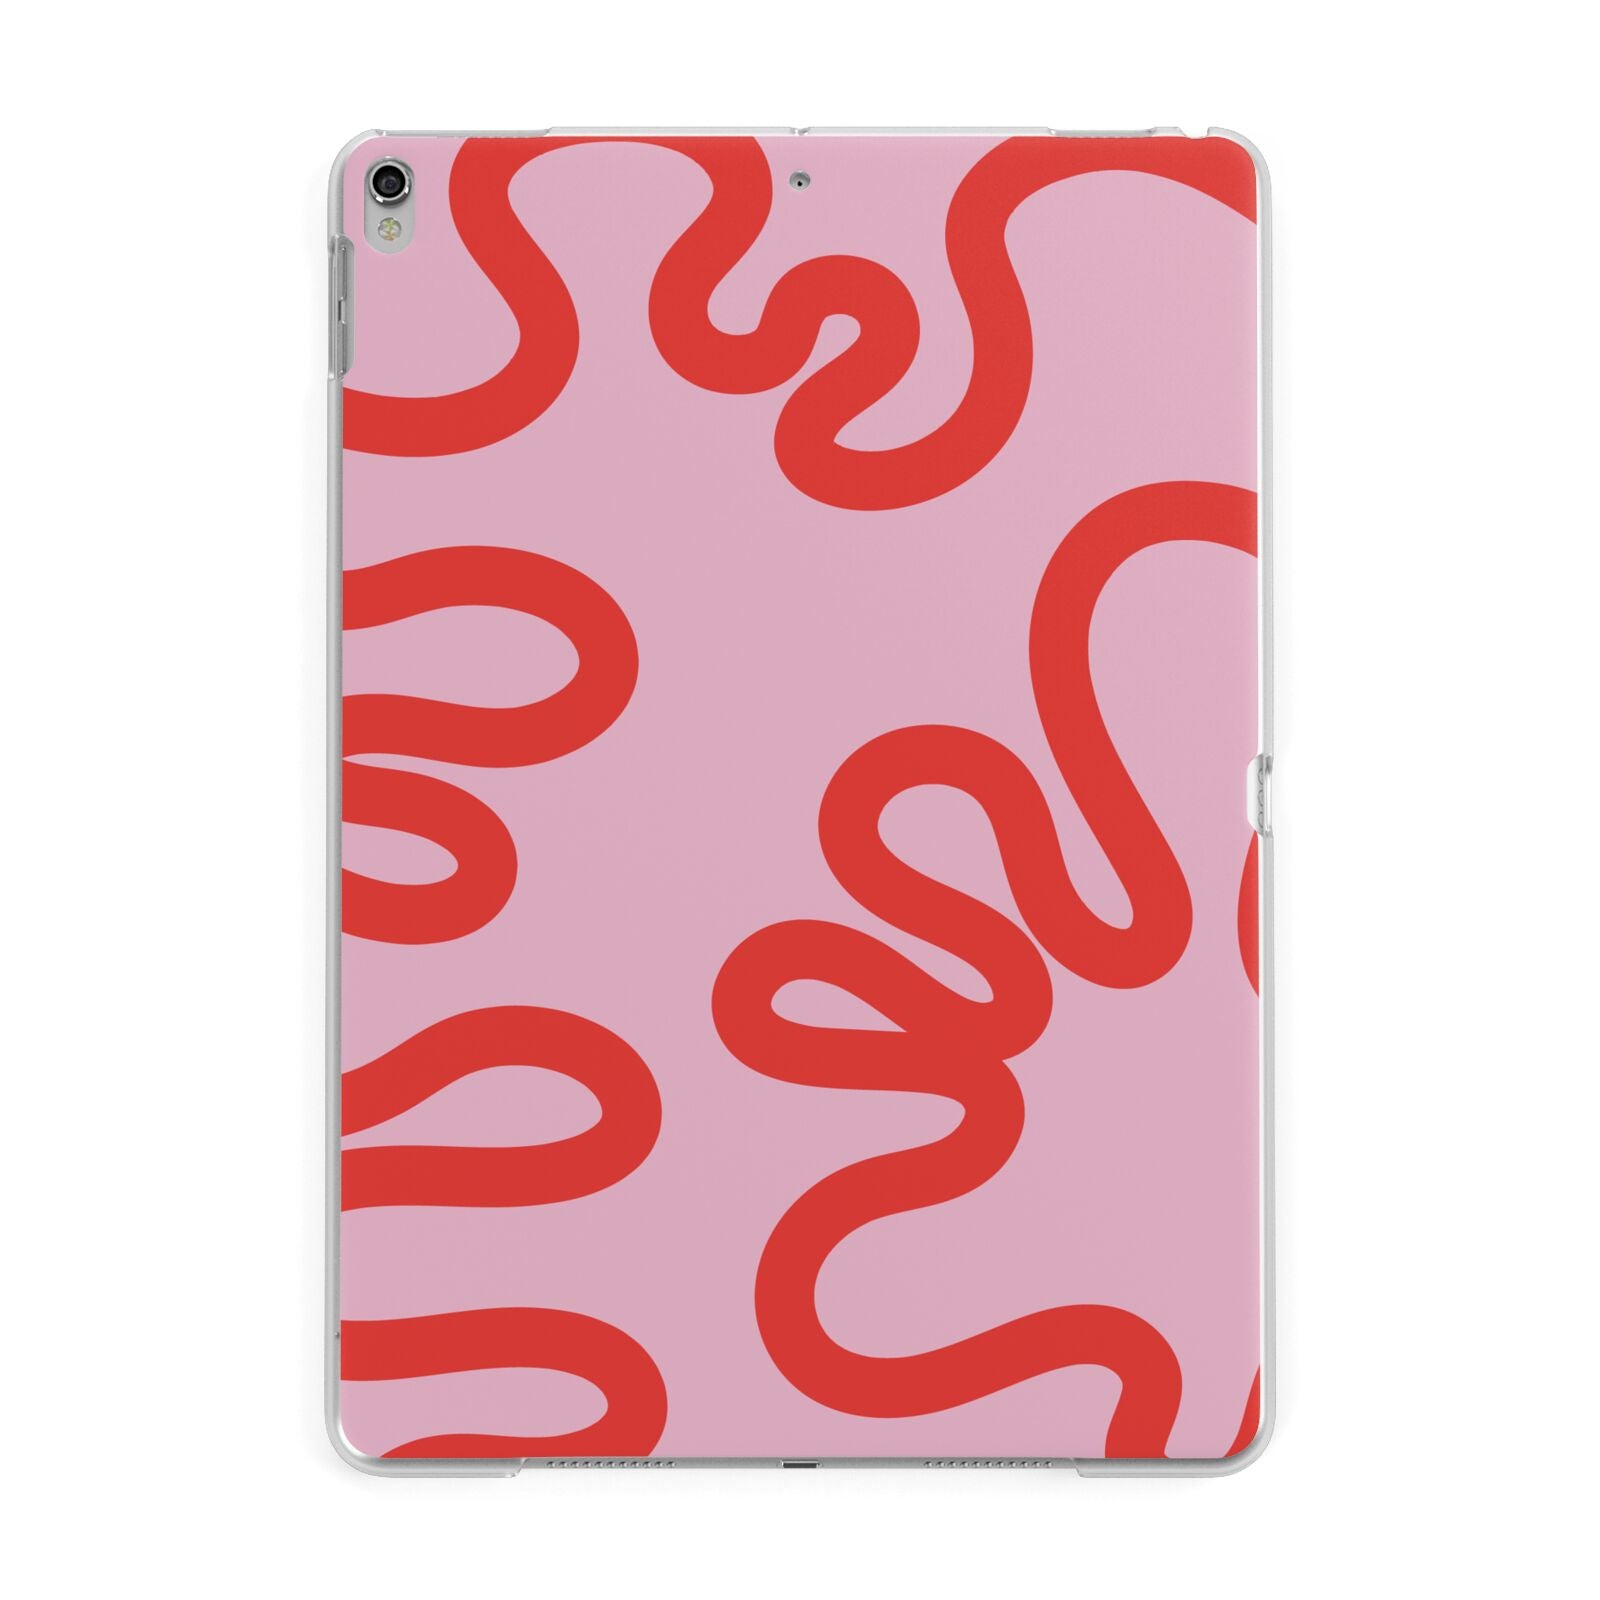 Squiggle Apple iPad Silver Case